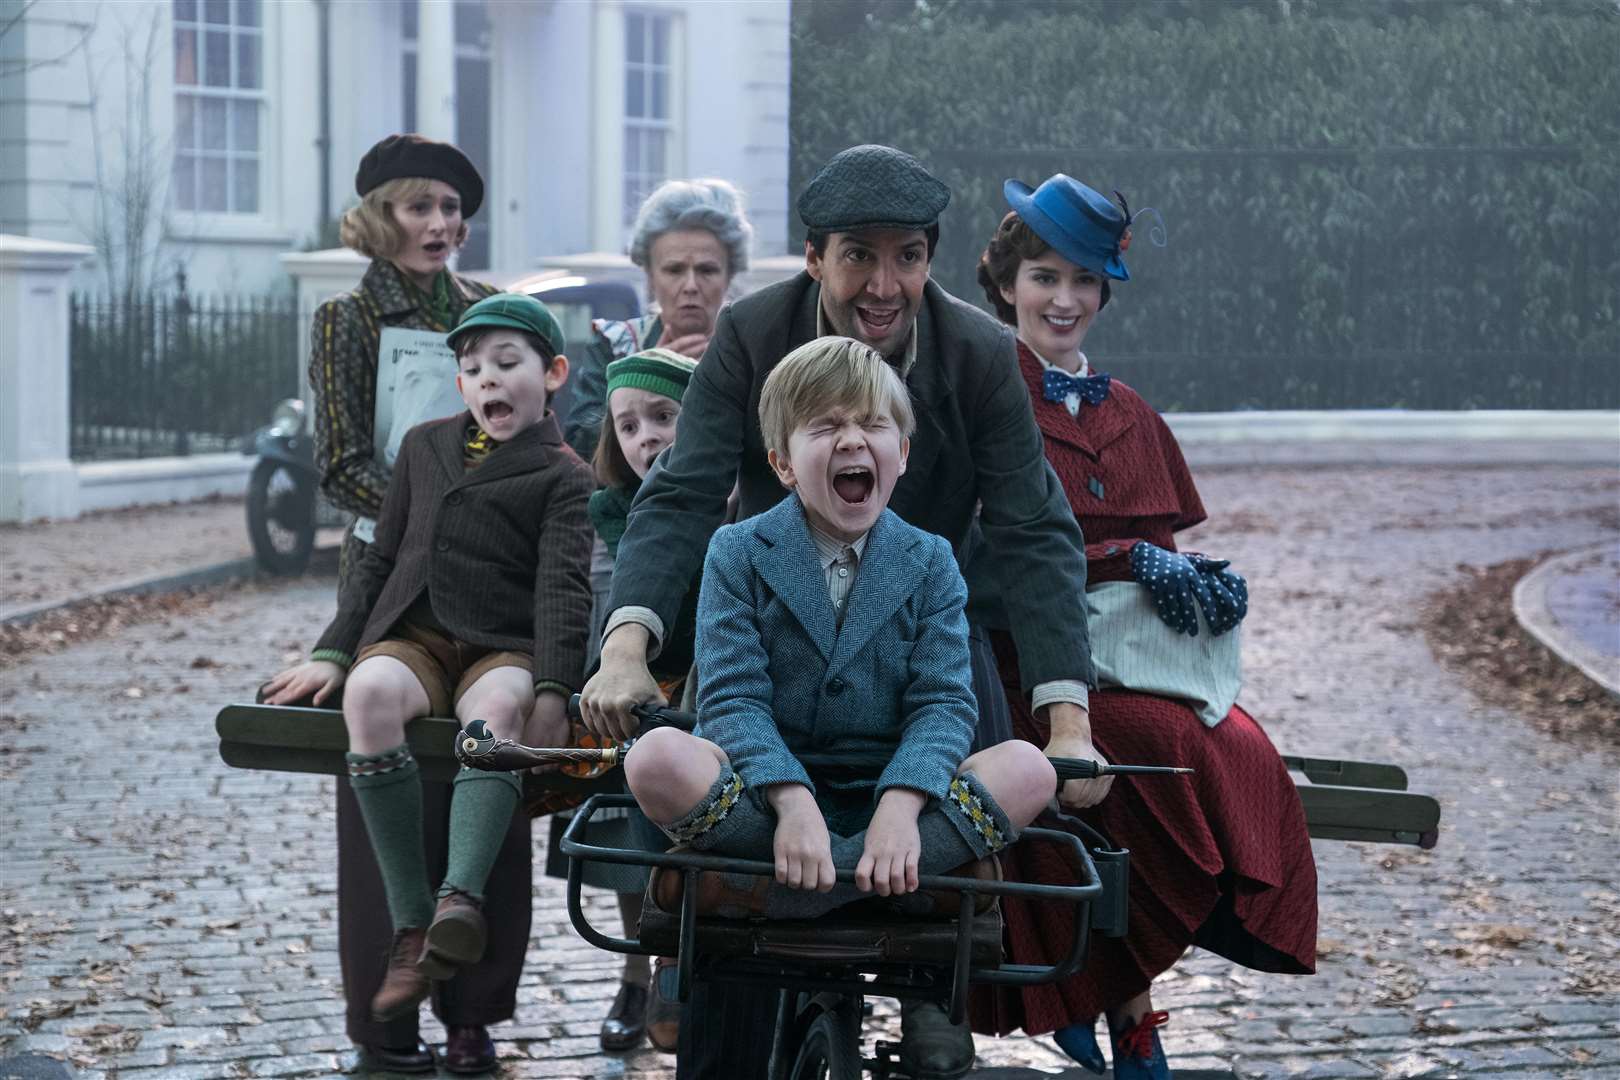 Will you be taking your family to see Mary Poppins this Christmas?